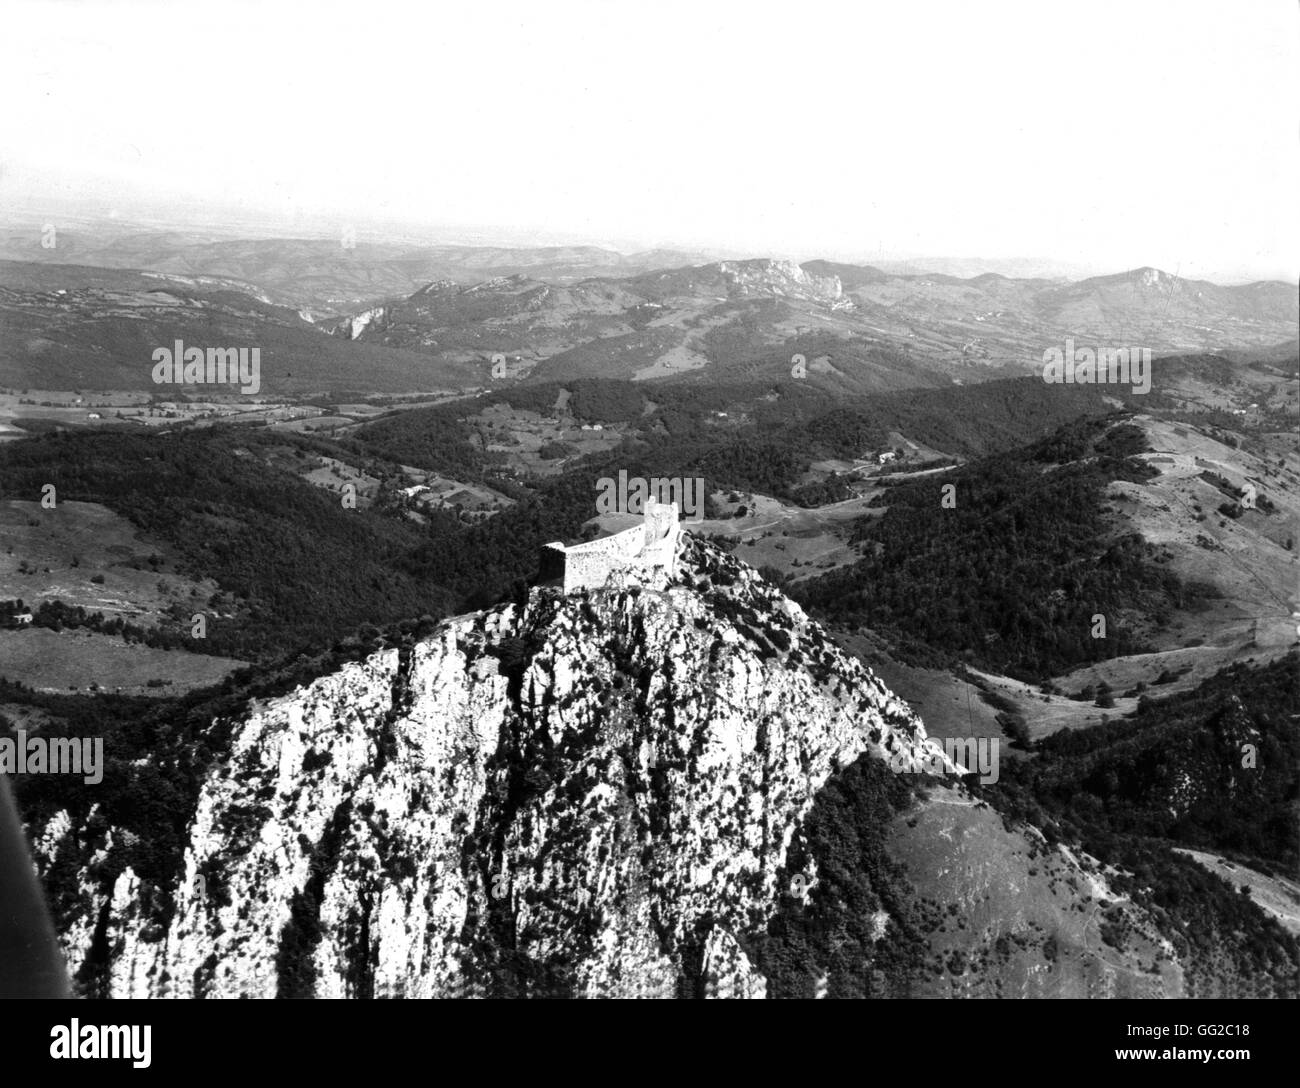 Castle of Montségur, one of the last fortresses of the Cathars, at the time of the Albigensian crusade. 12th century France Stock Photo